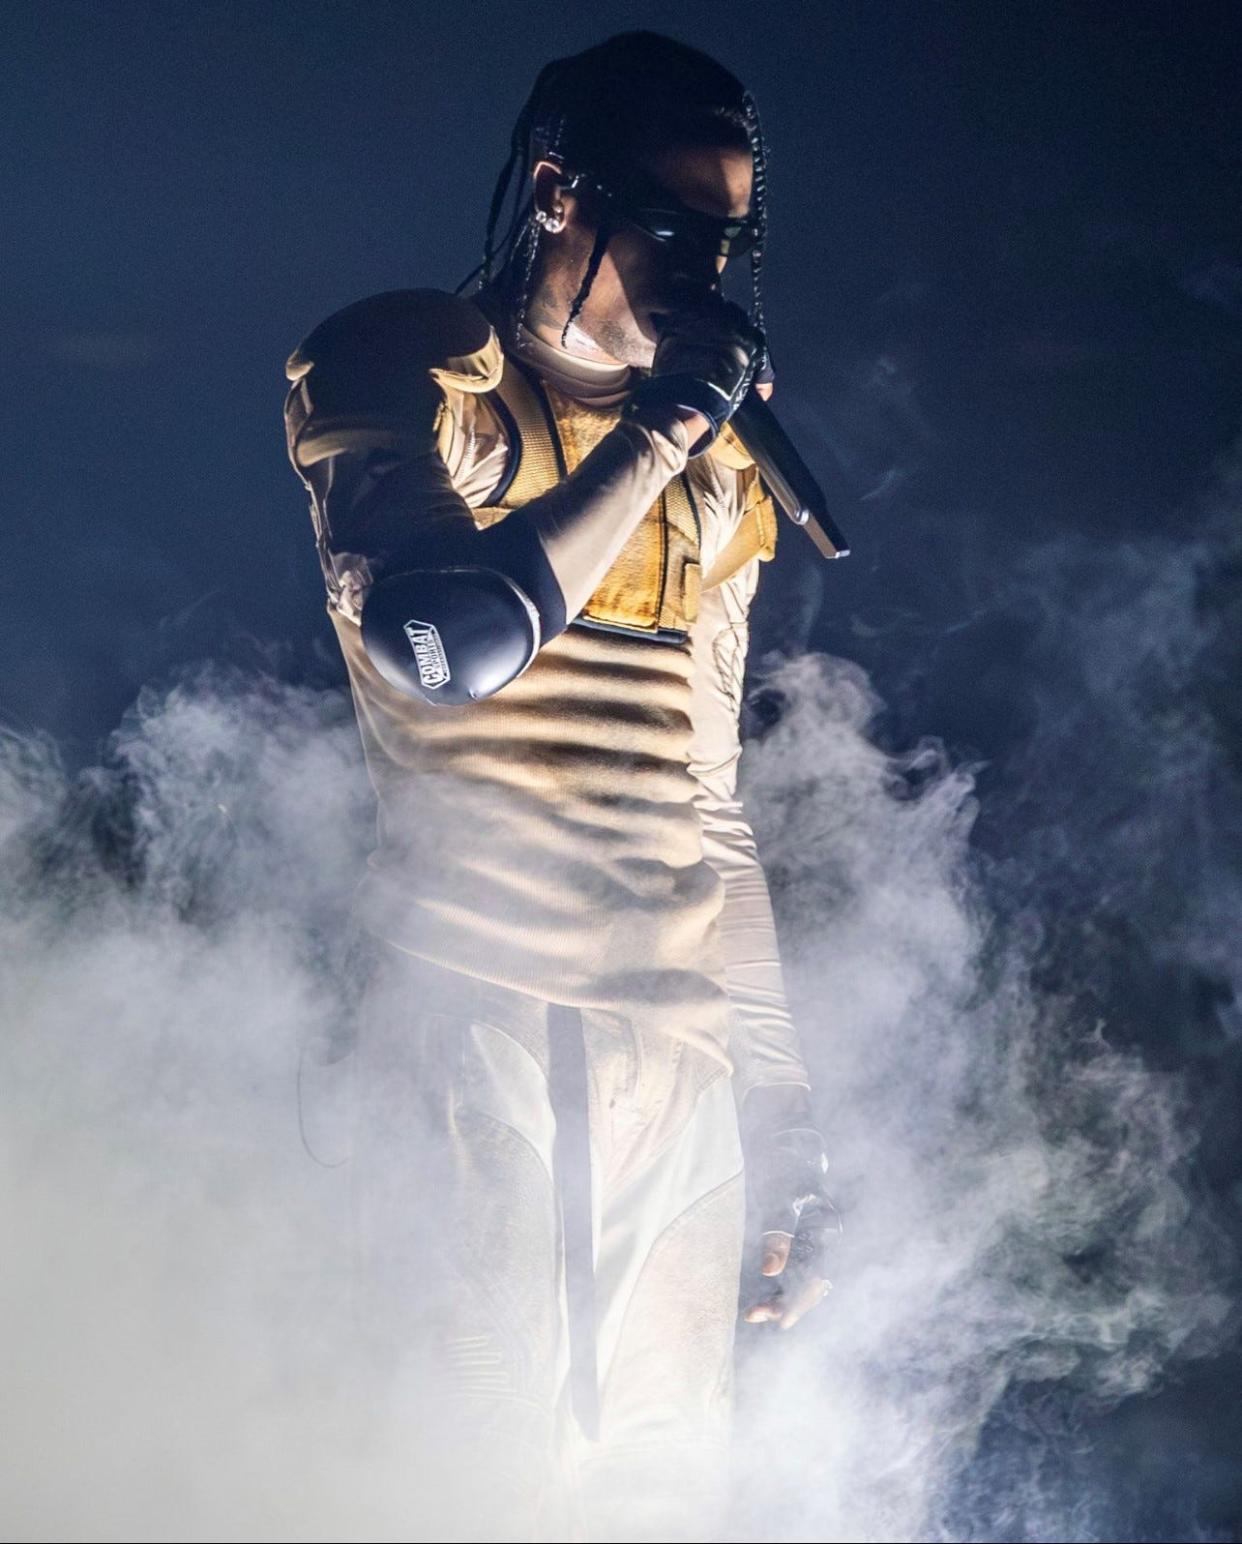 Ticket prices for Travis Scott’s Fiserv Forum concert actually dropped after going on sale due to low demand.